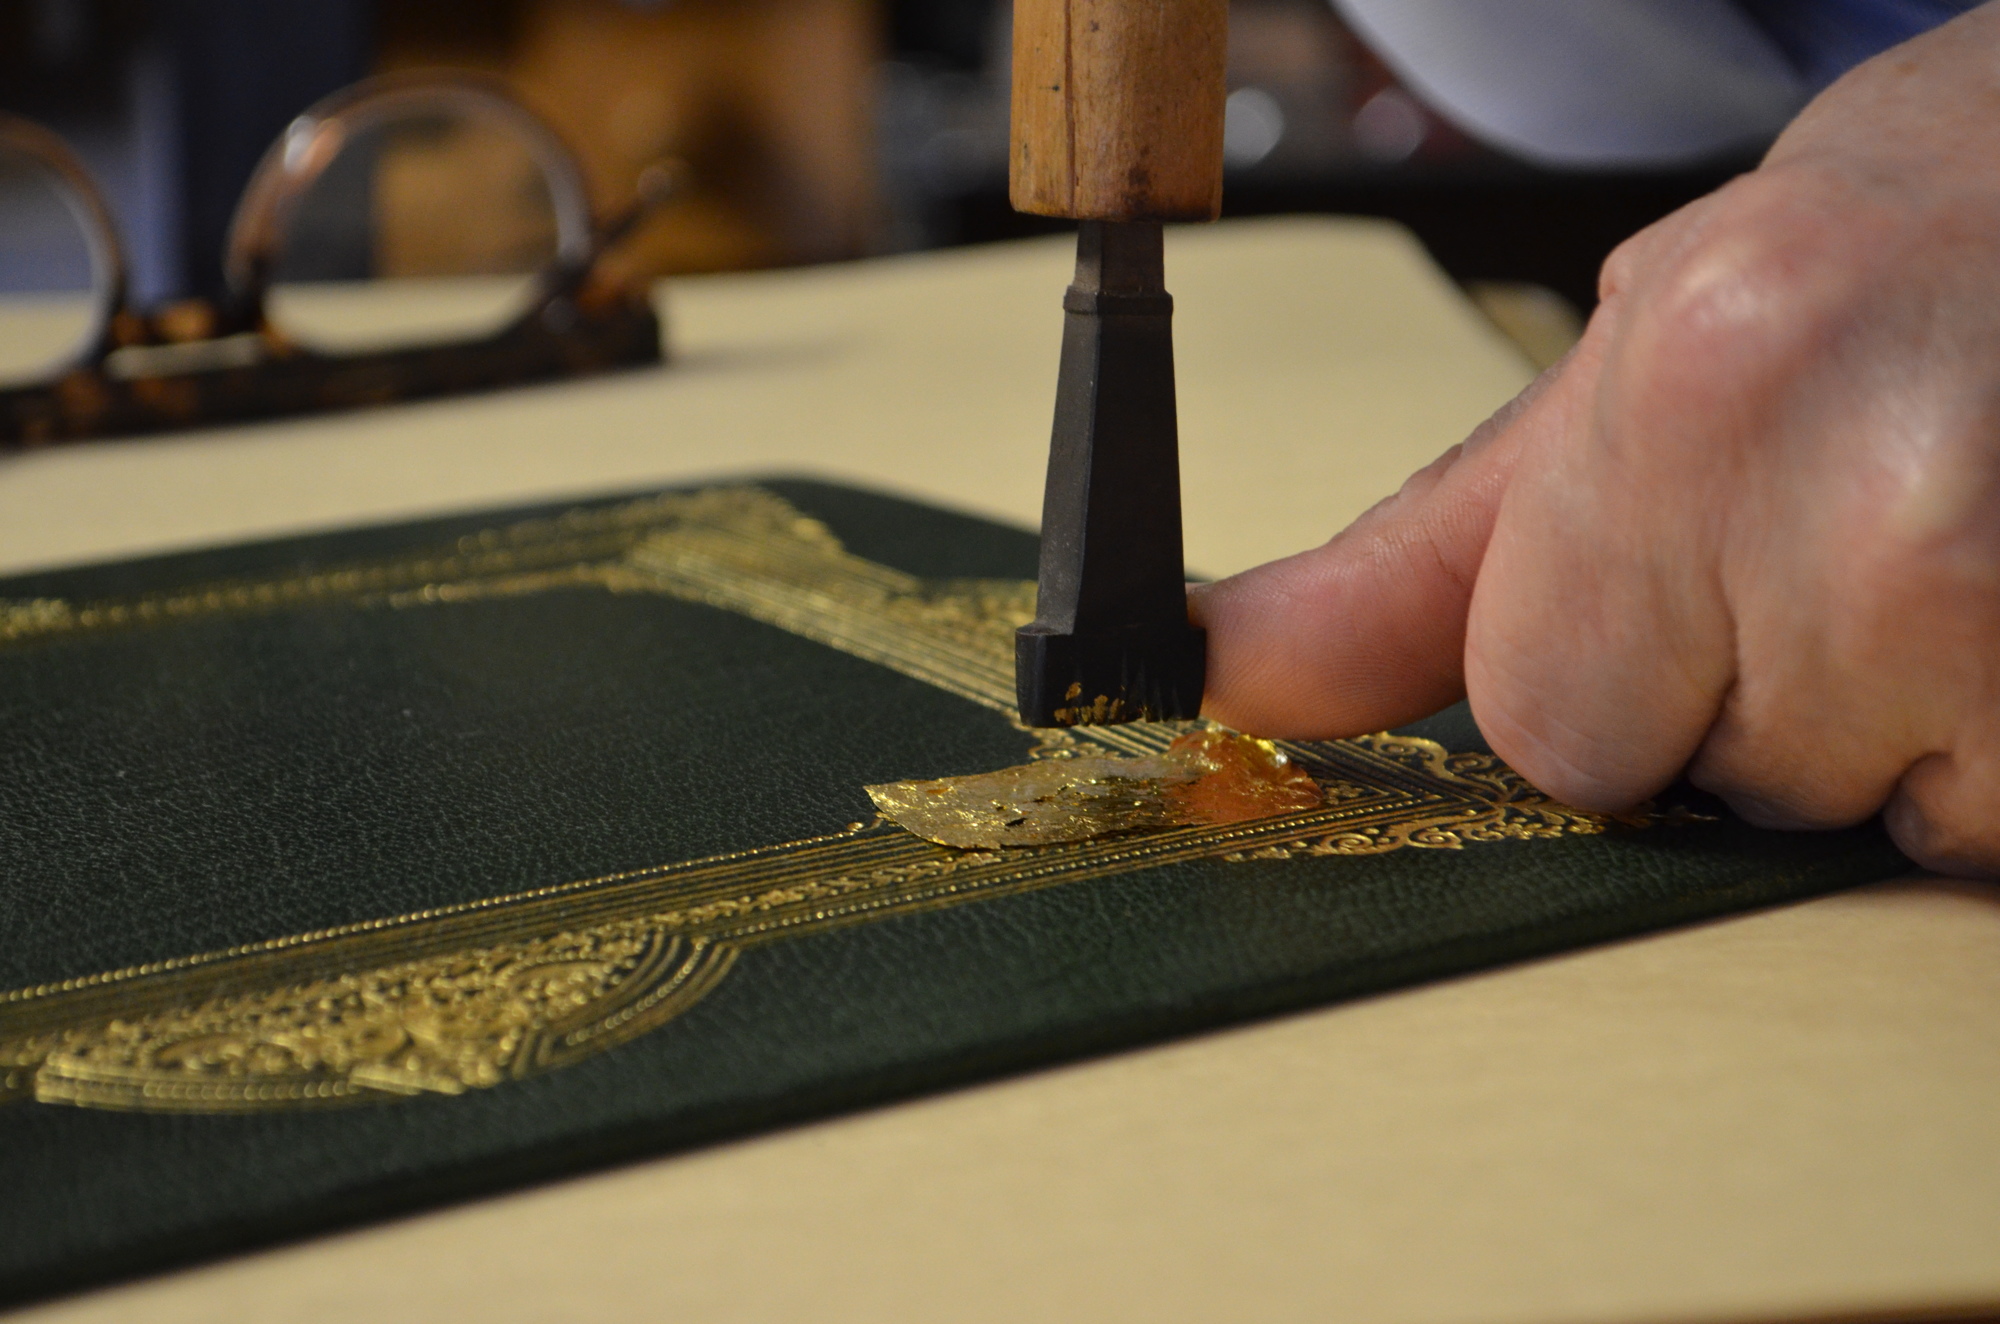 Tapley presses a piece of gold leaf into a dark green leather cover.